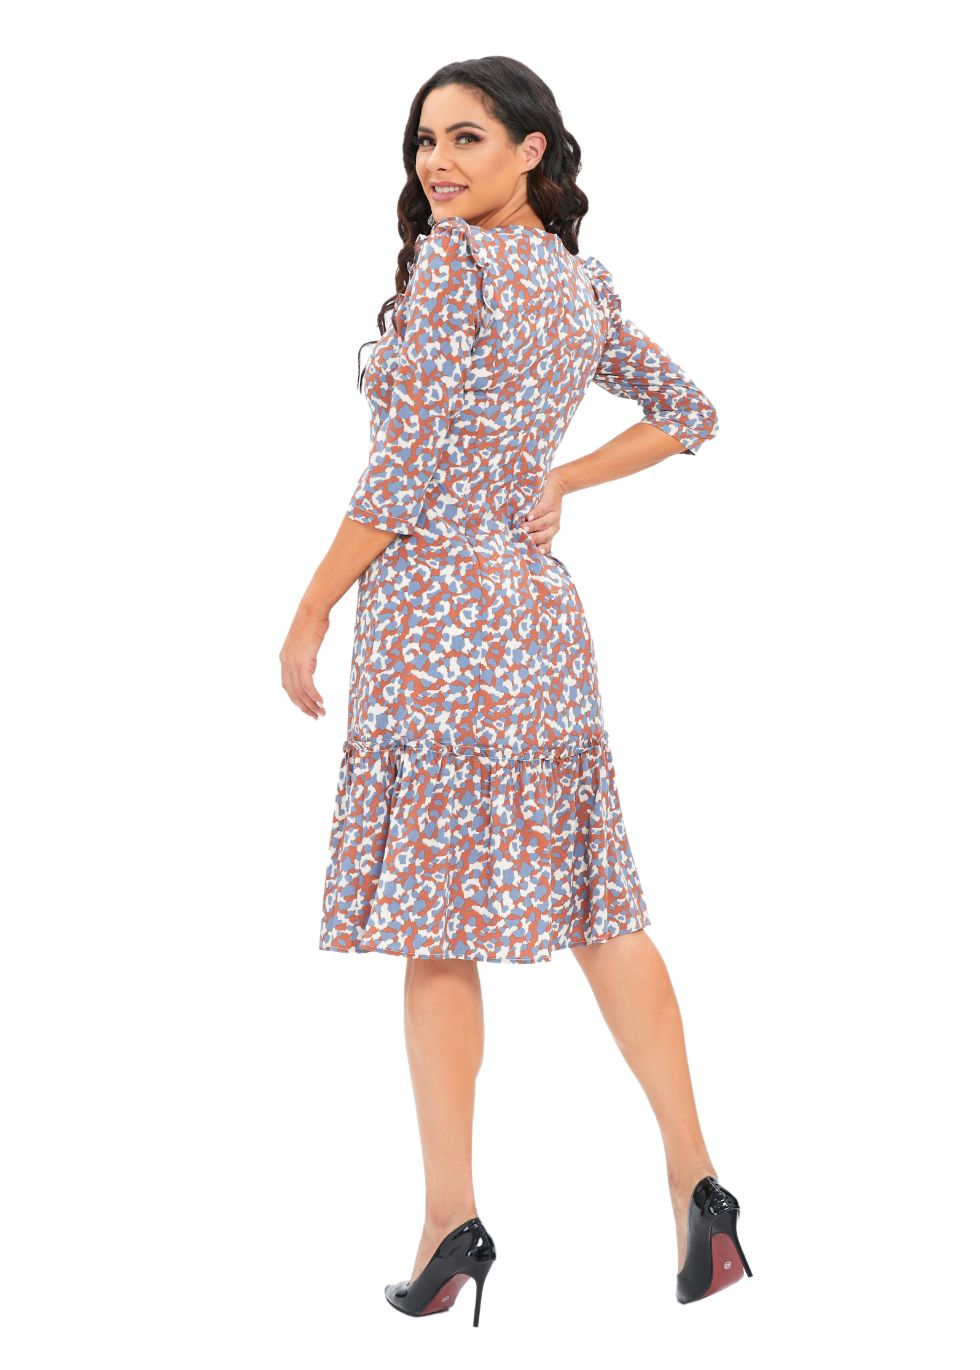 Low Waist Geo Print Dress with 3/4 Sleeves - seilerlanguageservices